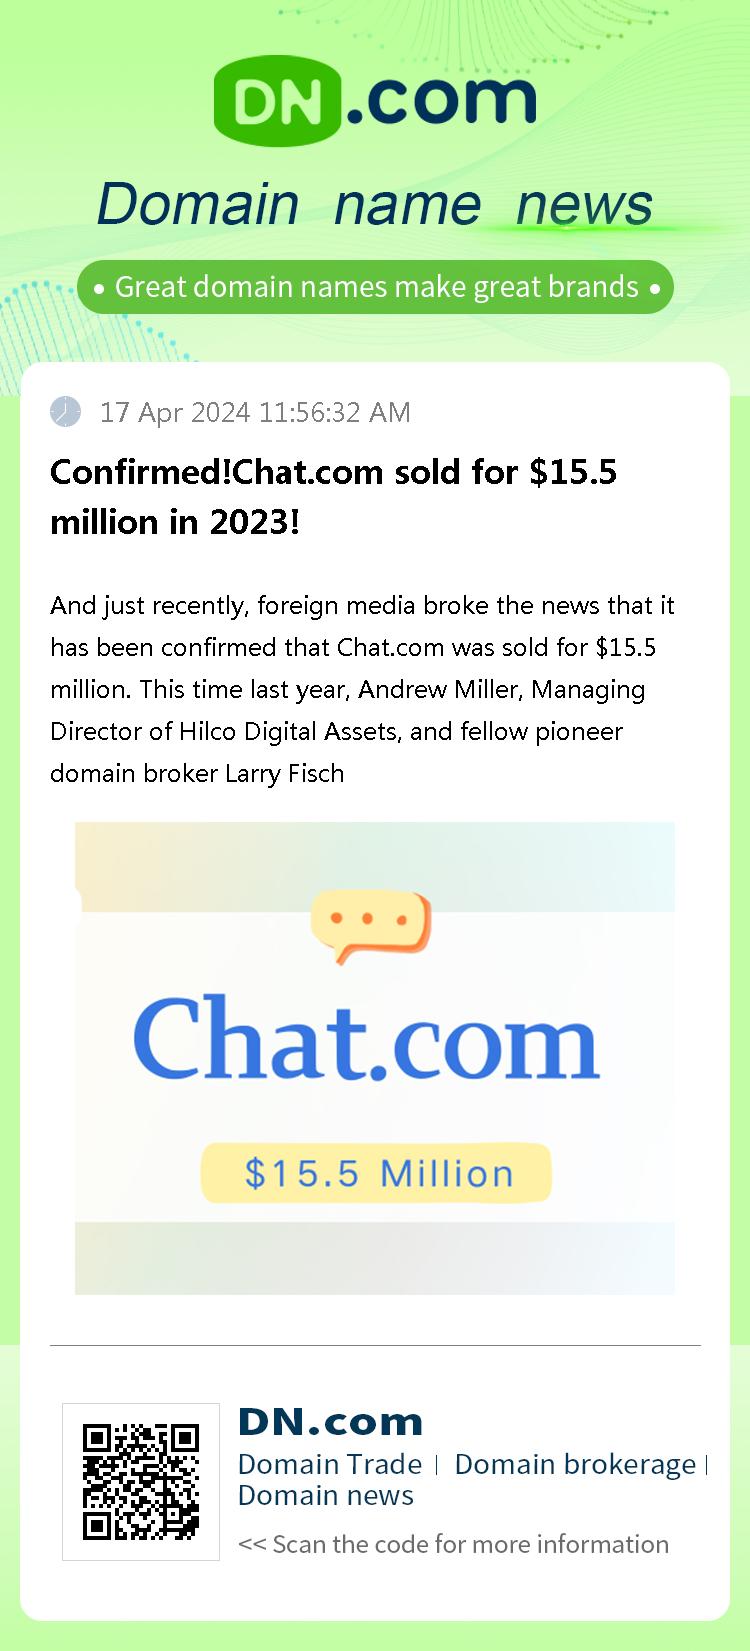 Confirmed!Chat.com sold for $15.5 million in 2023!